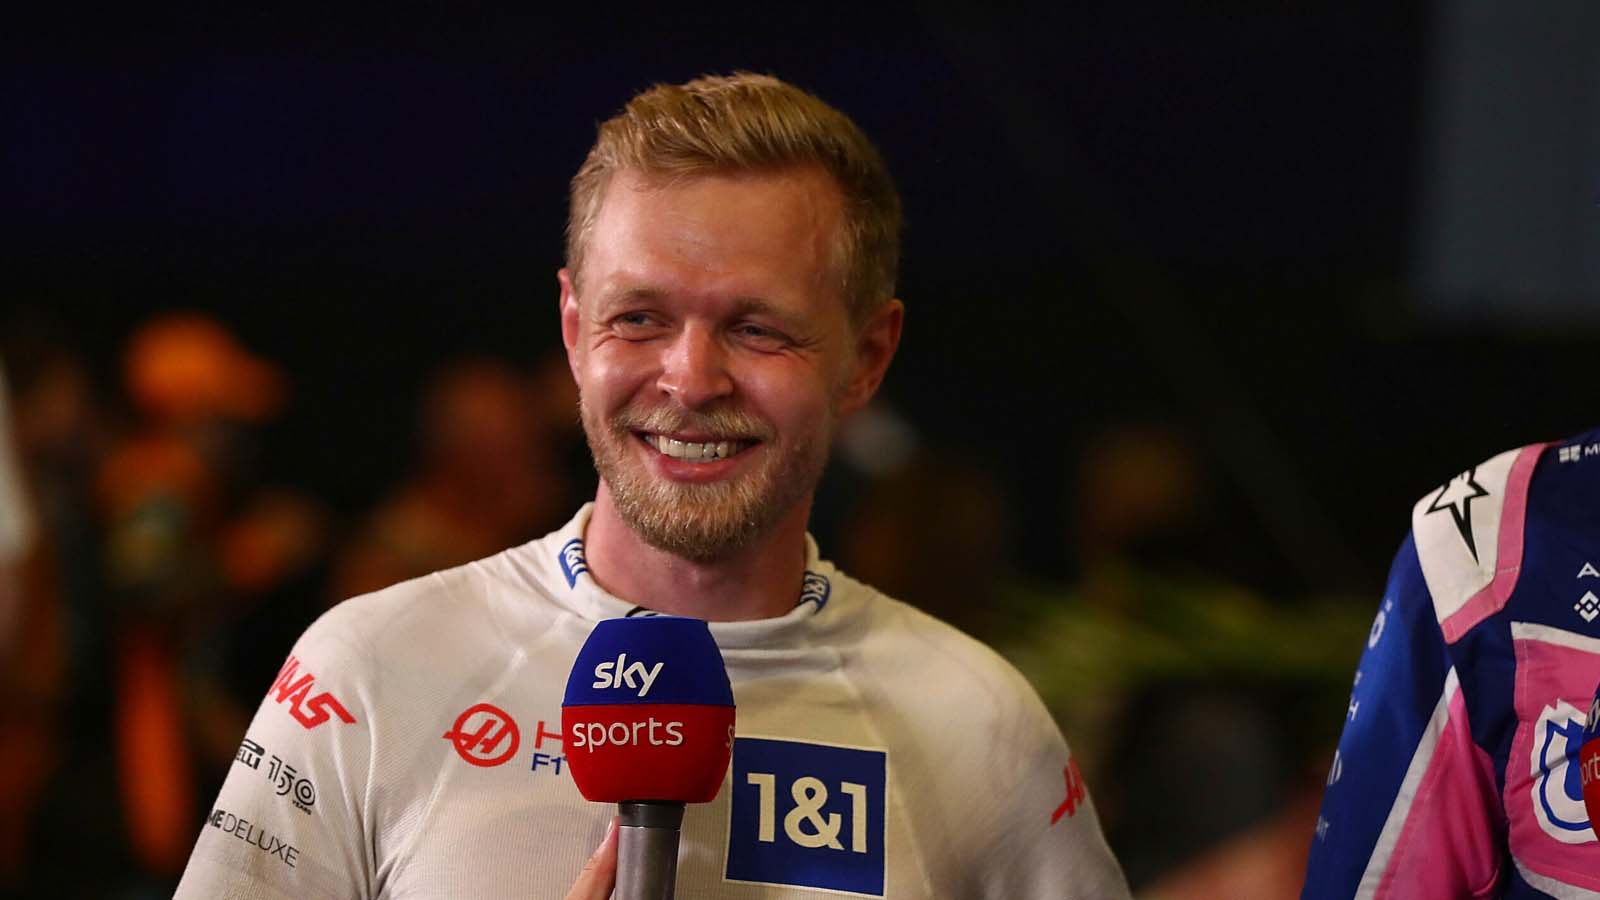 Kevin Magnussen interviewed by Sky. Saudi Arabia March 2022.